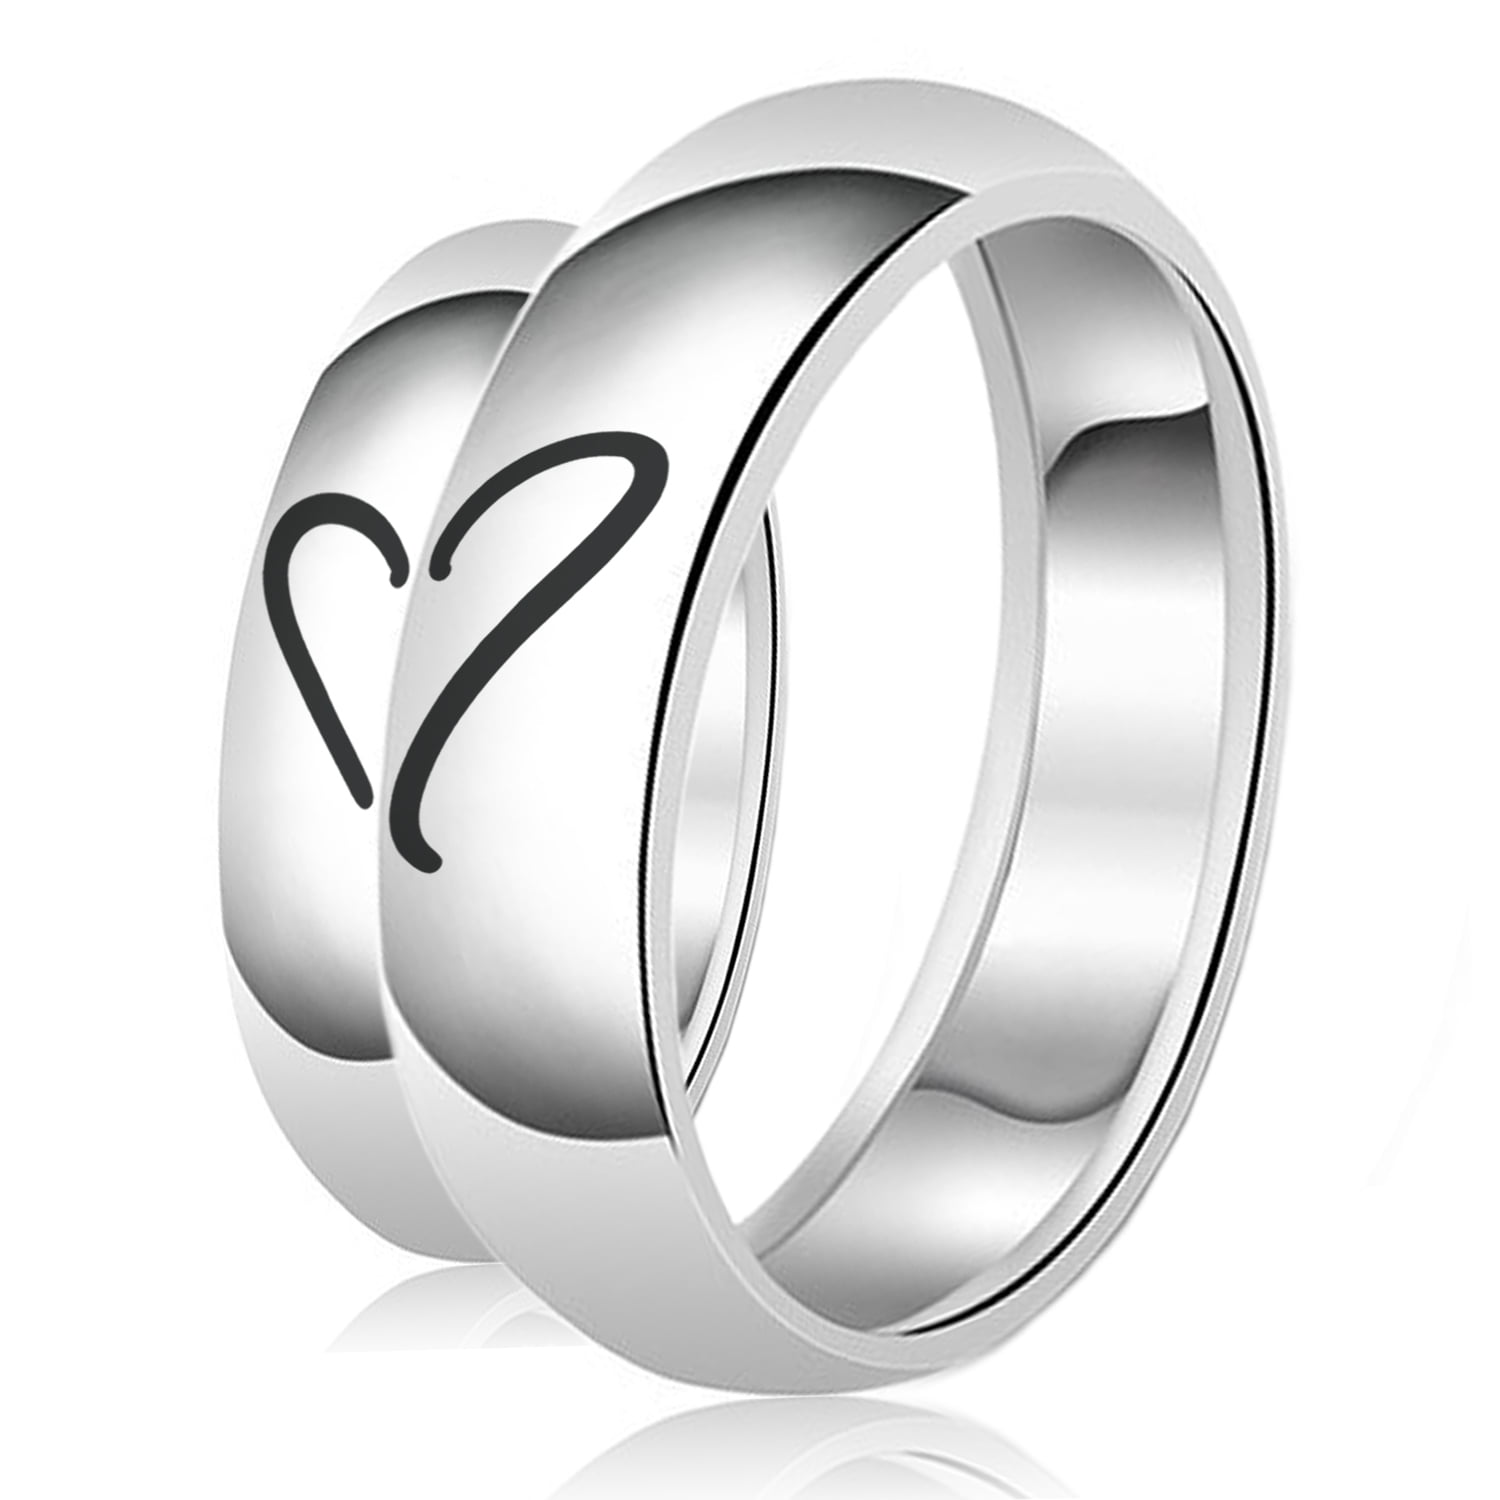 Gnzoe Women Men Engagement Rings Engrave Love Rings Heart Knot Ring 5mm/5.5mm Silver Price One Pc